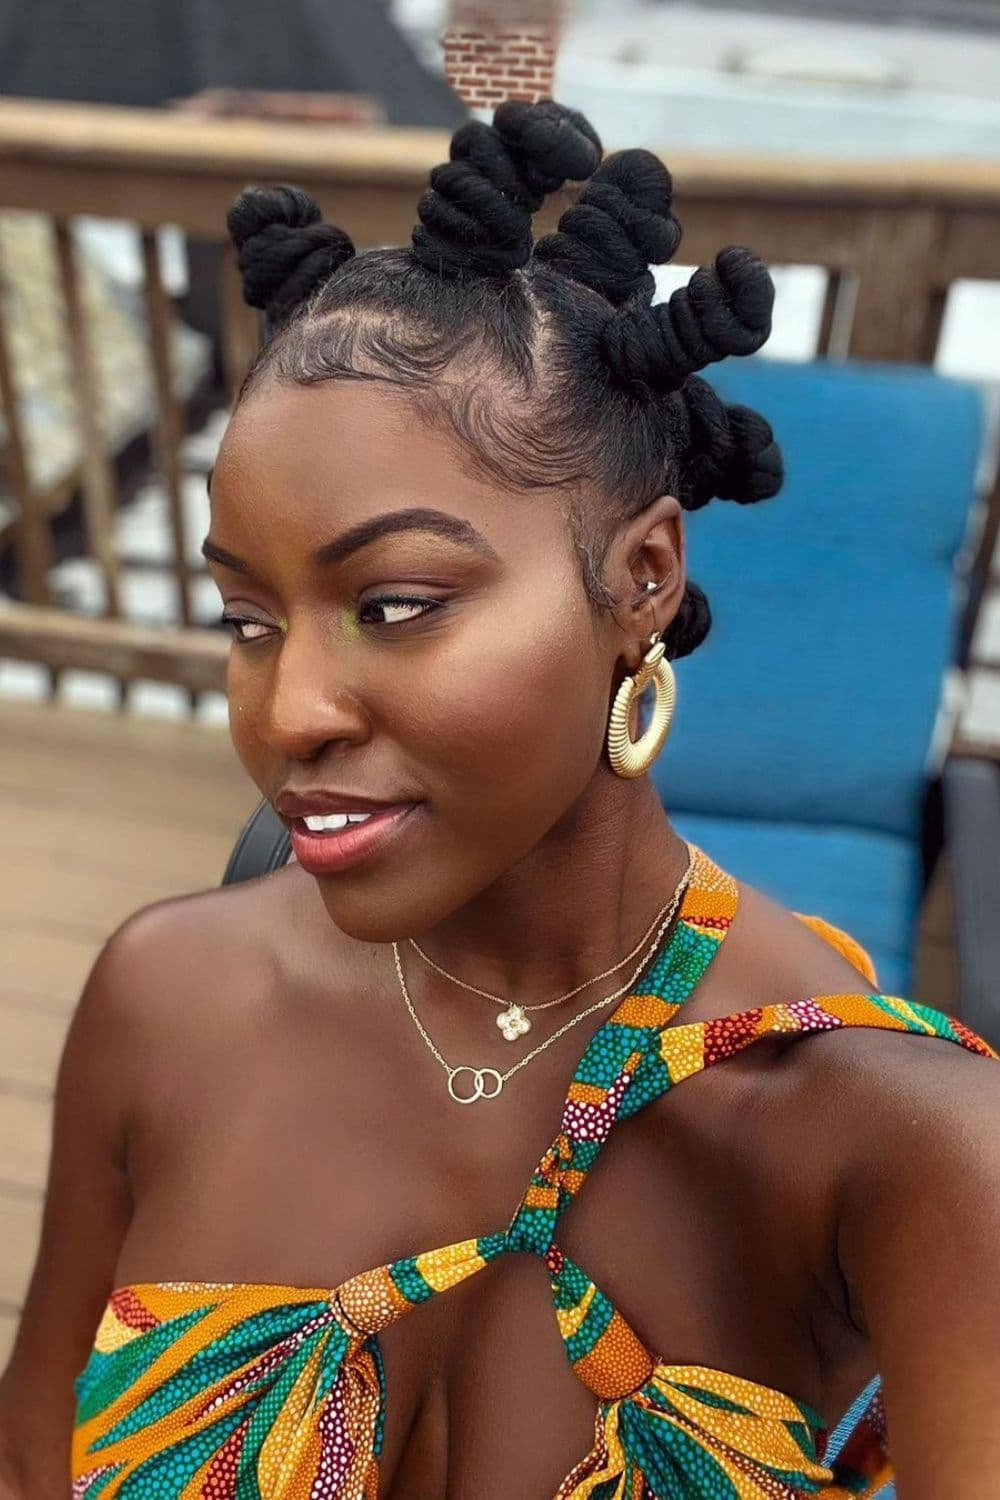 A woman wearing gold earrings and a gold necklace with Bantu knots.